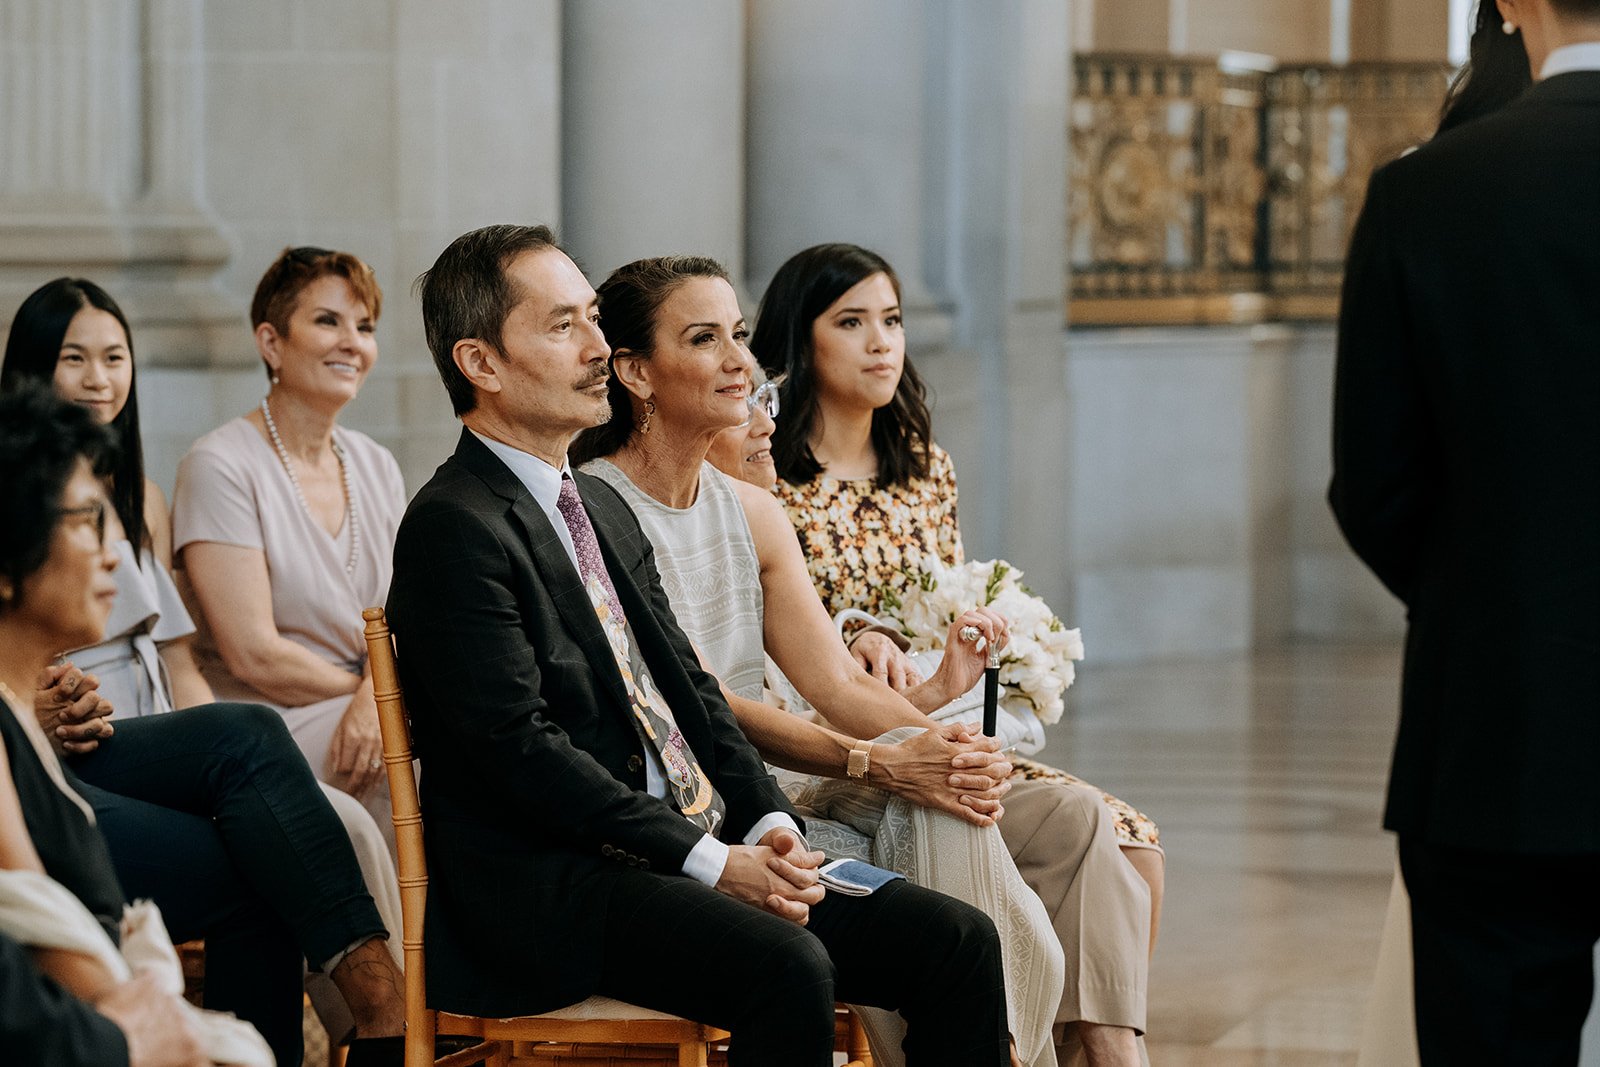  wedding guests smiling while watching ceremony  